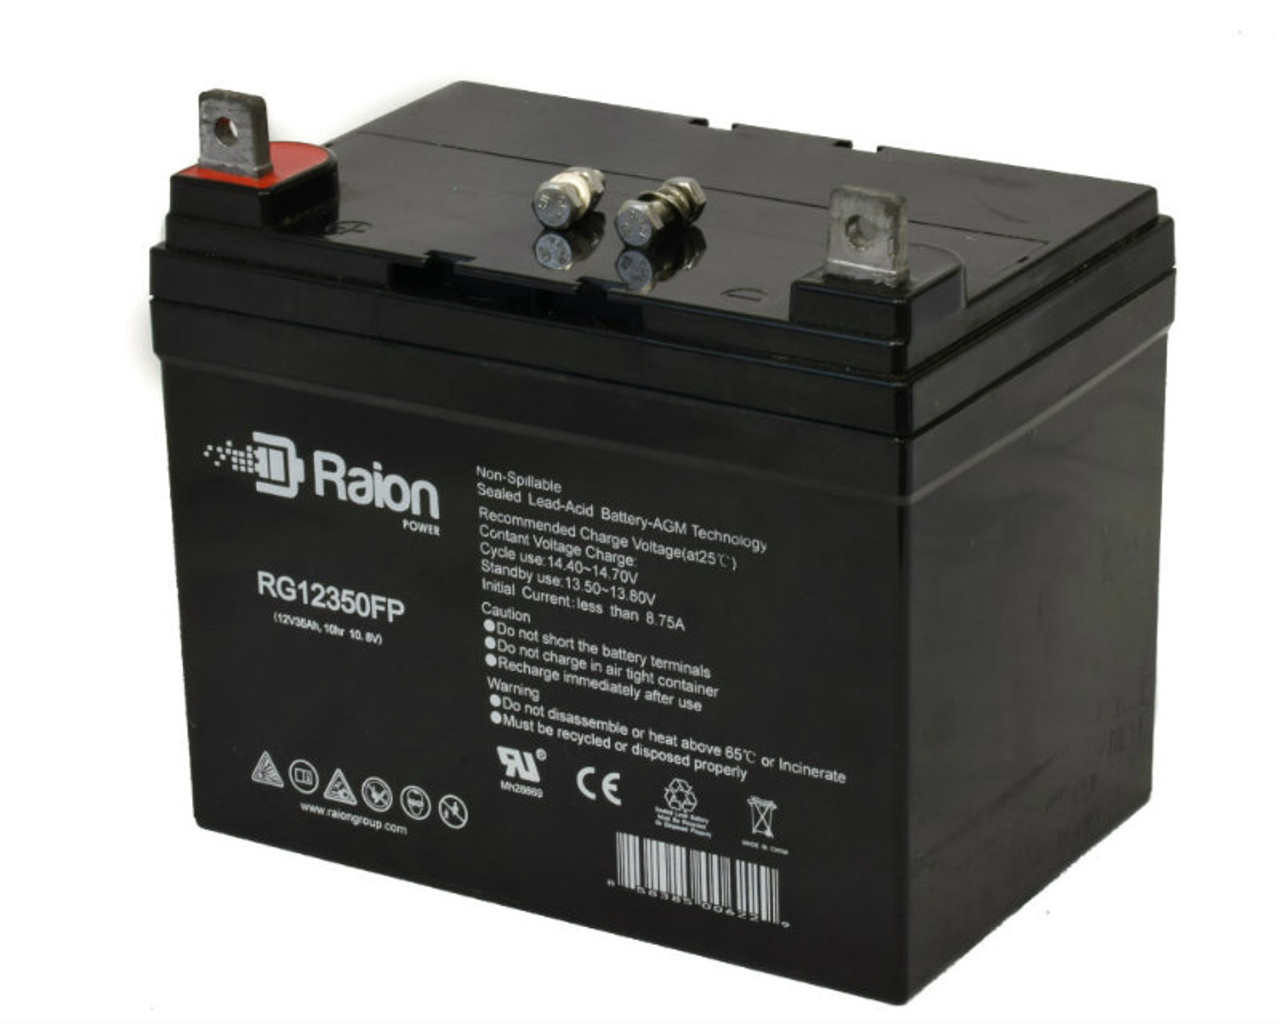 Raion Power Replacement 12V 35Ah RG12350FP Battery for Ingersol Equipment 4116